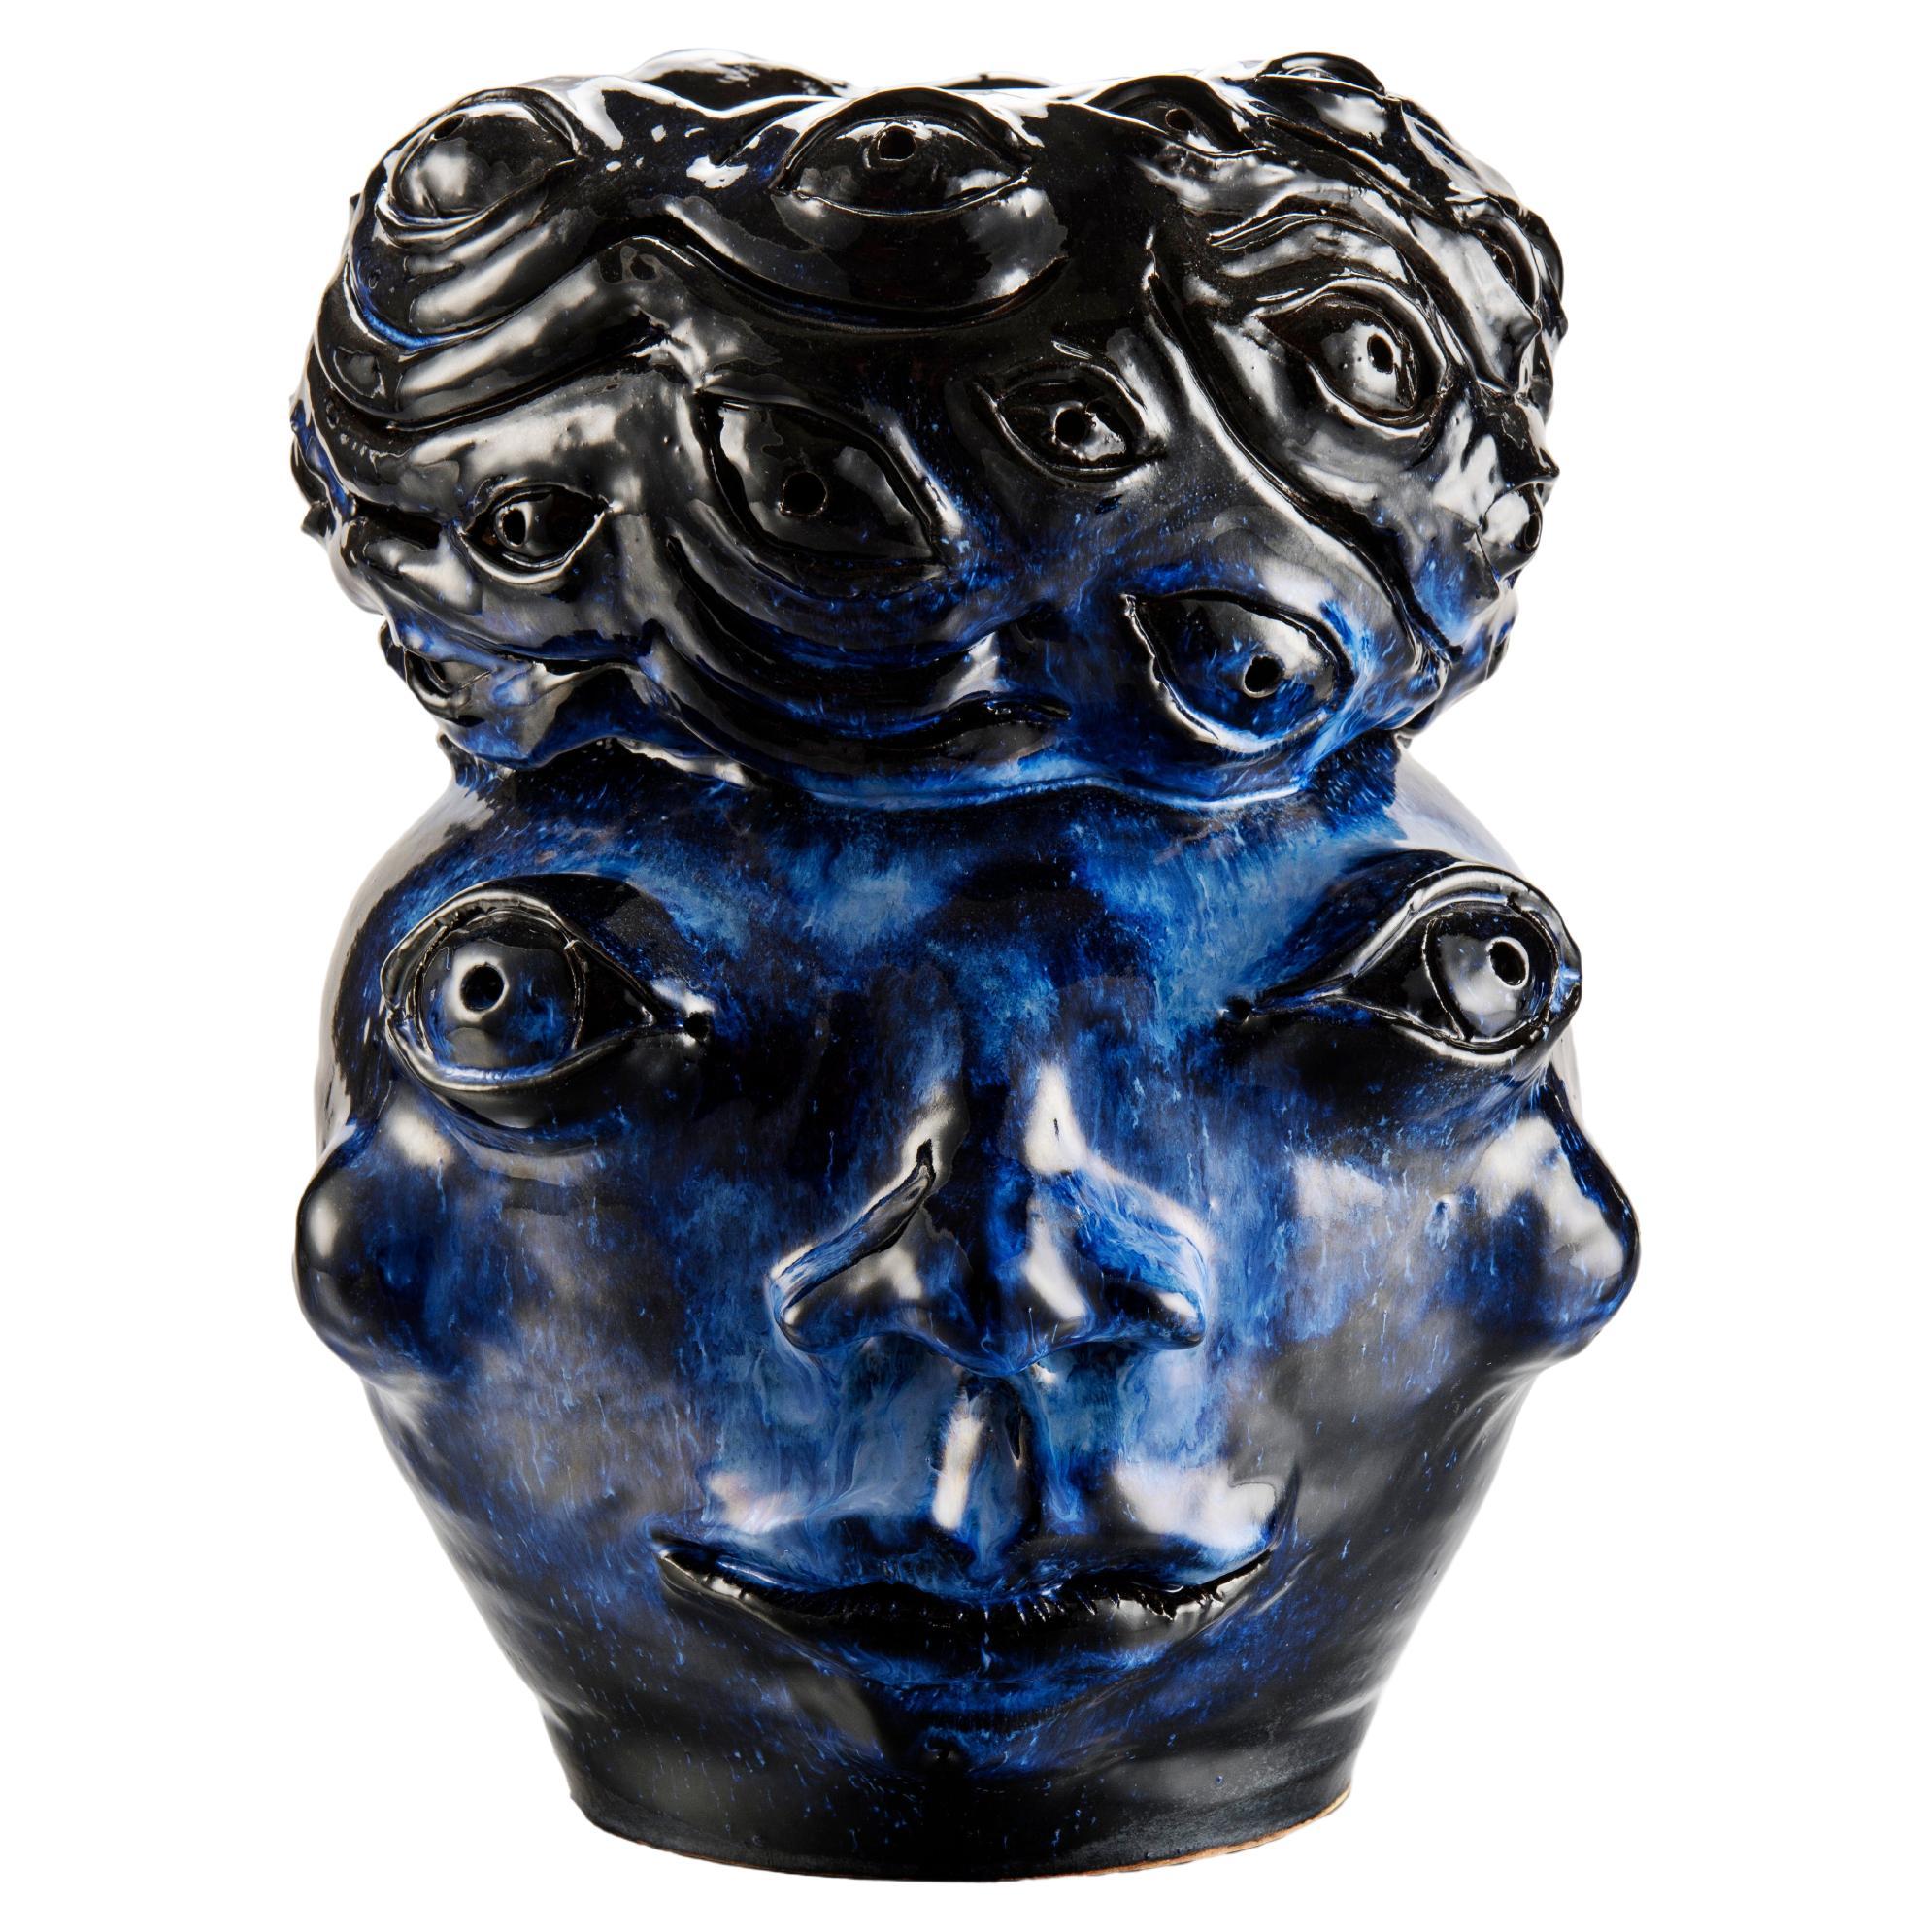 Freaklab Vase Made Entirely by Hand in Ceramic, Blue-Black Color For Sale